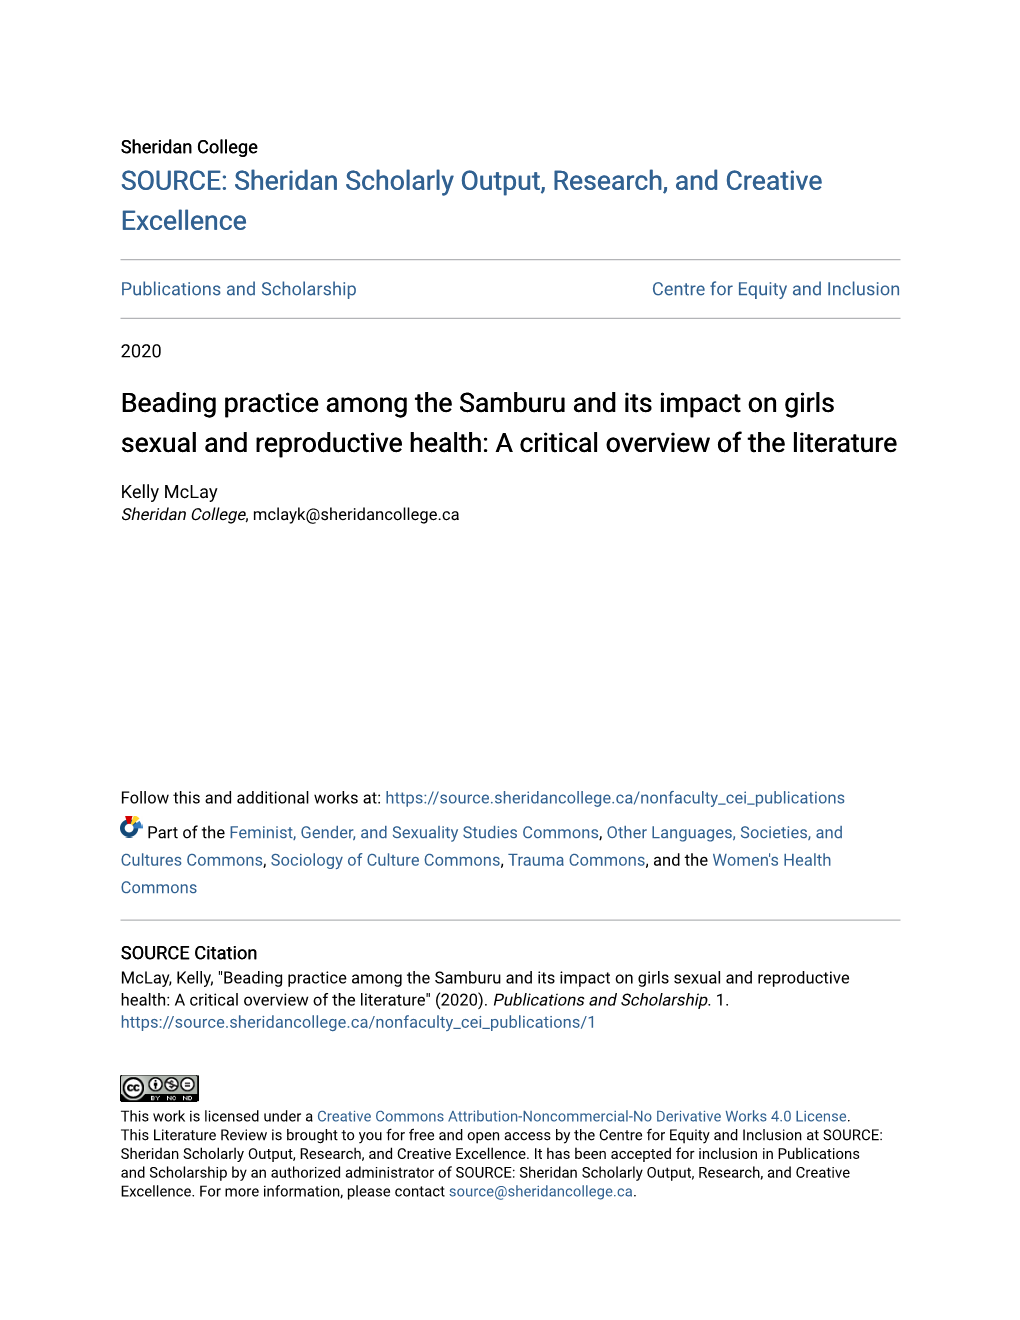 Beading Practice Among the Samburu and Its Impact on Girls Sexual and Reproductive Health: a Critical Overview of the Literature